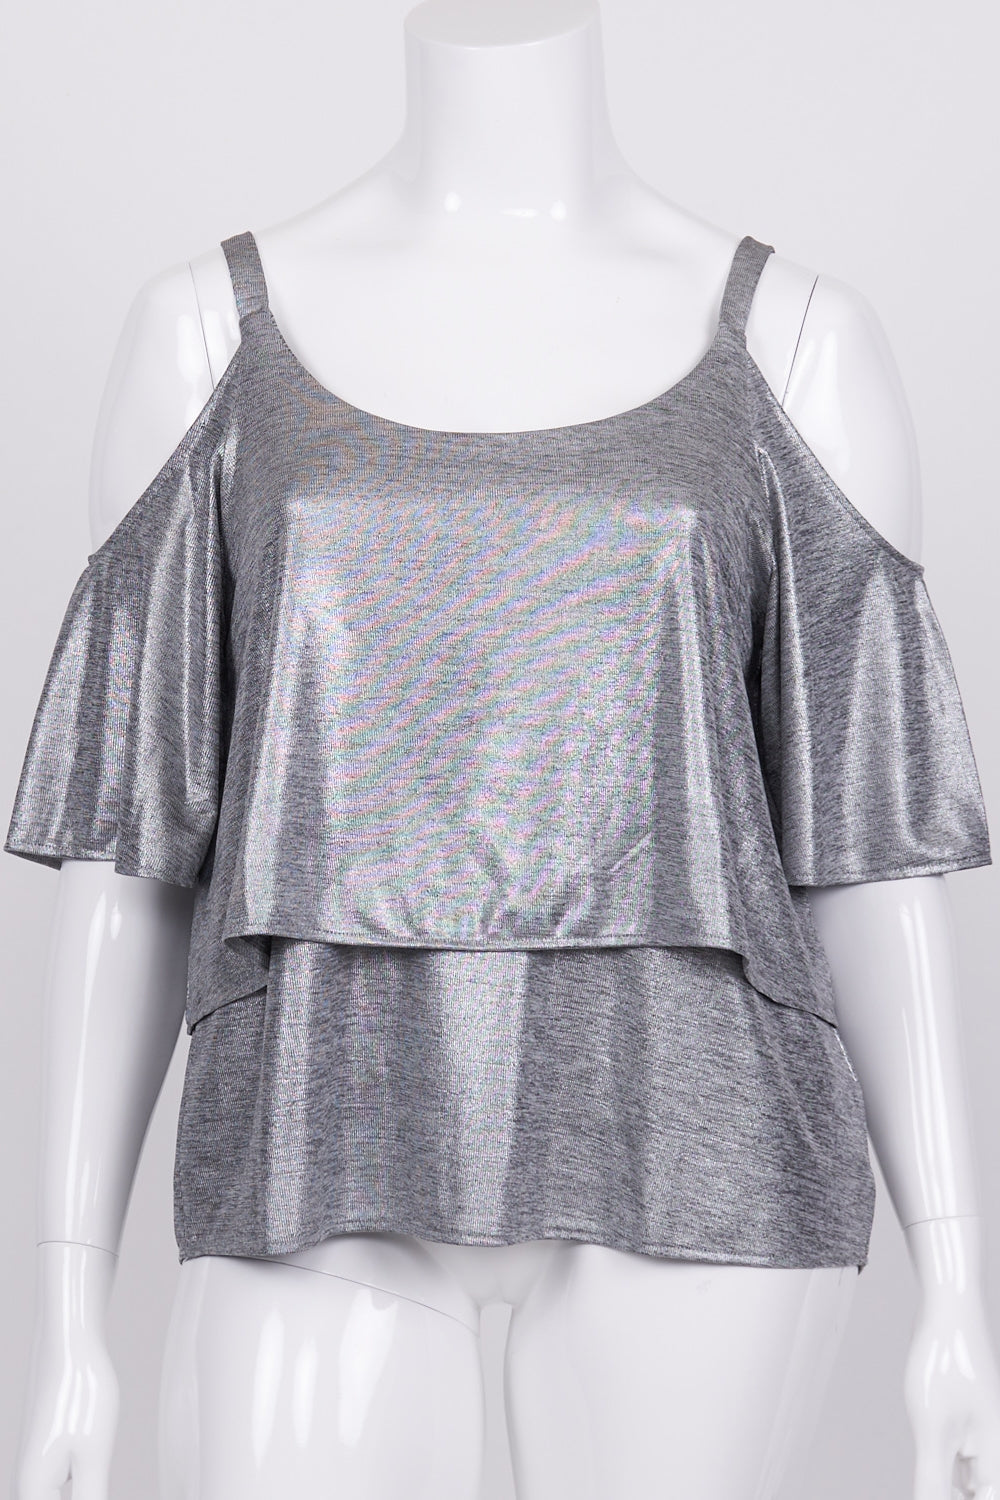 Grace Hill Silver Layer Top 14